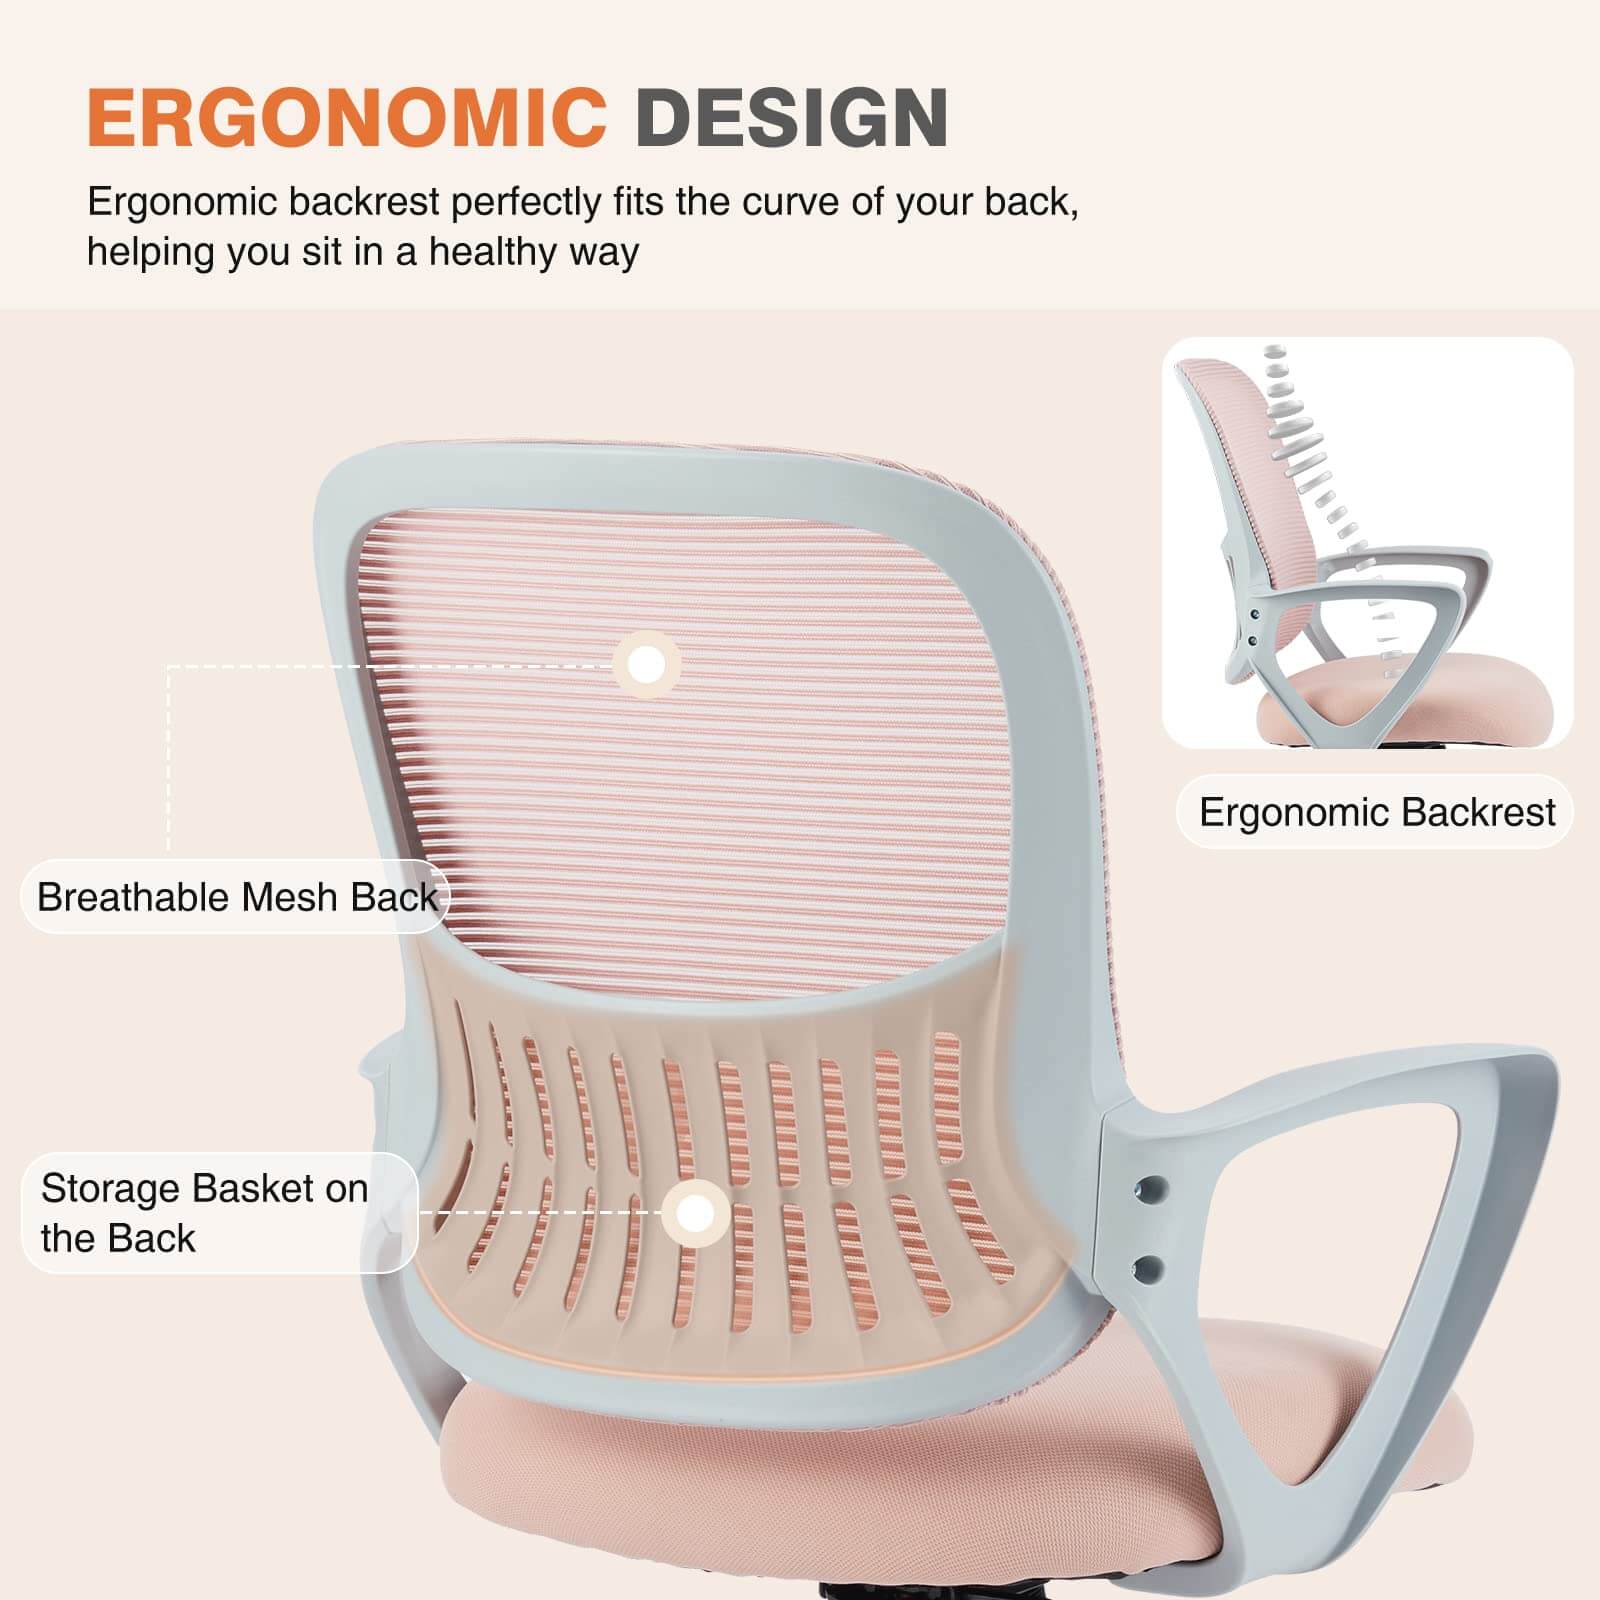 office-chair-ergonomic#Quantity_1 Chair#Color_Pink